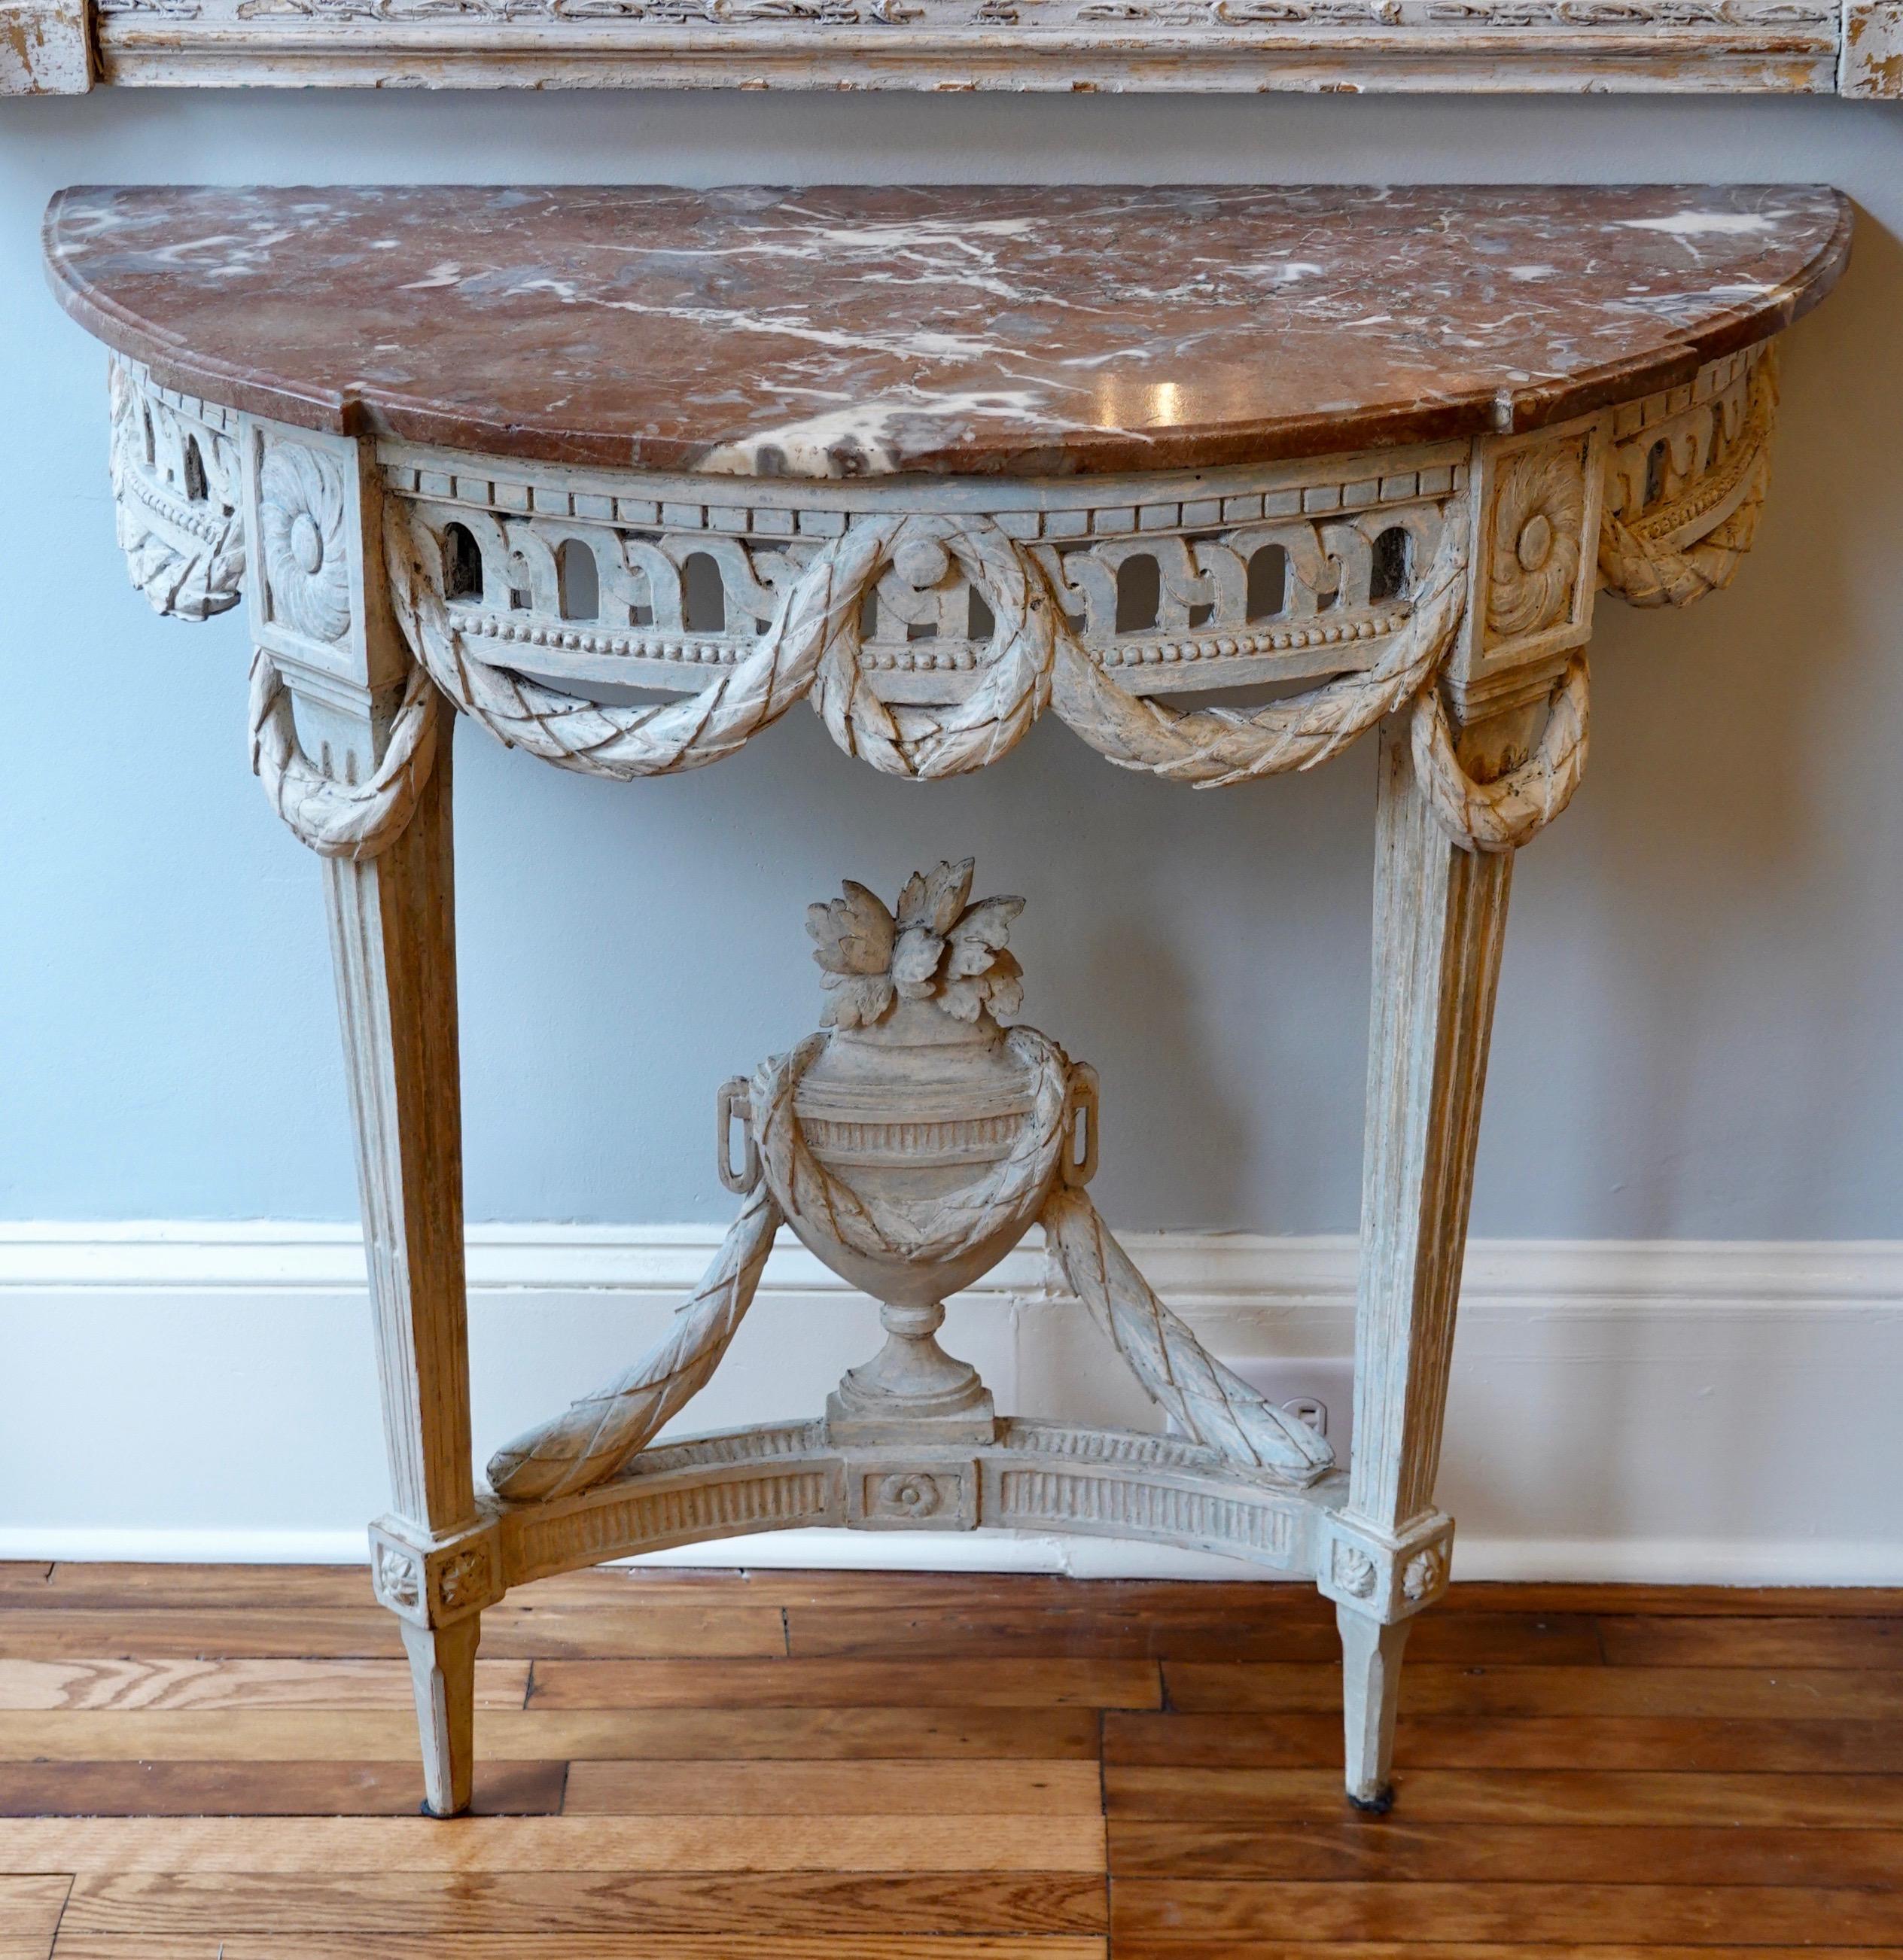 Louis XVI Period Painted Console Table with Variegated Marble Top In Good Condition For Sale In Pembroke, MA